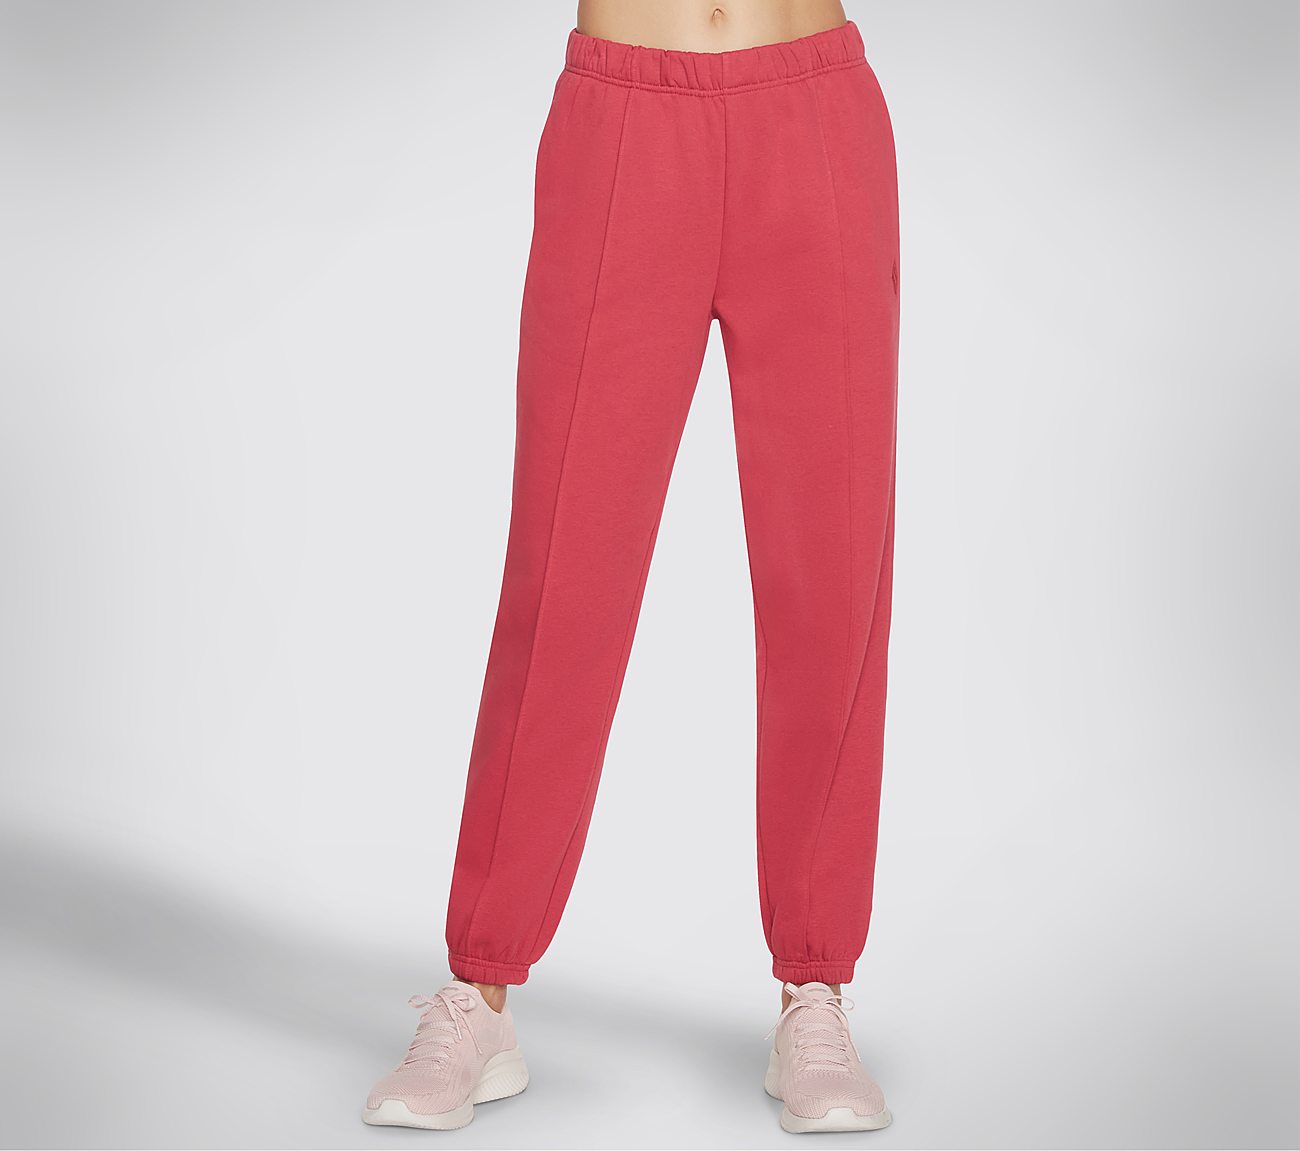 KECH-SWEATS DIAMOND DELIGHTF, RED/PINK Apparel Lateral View